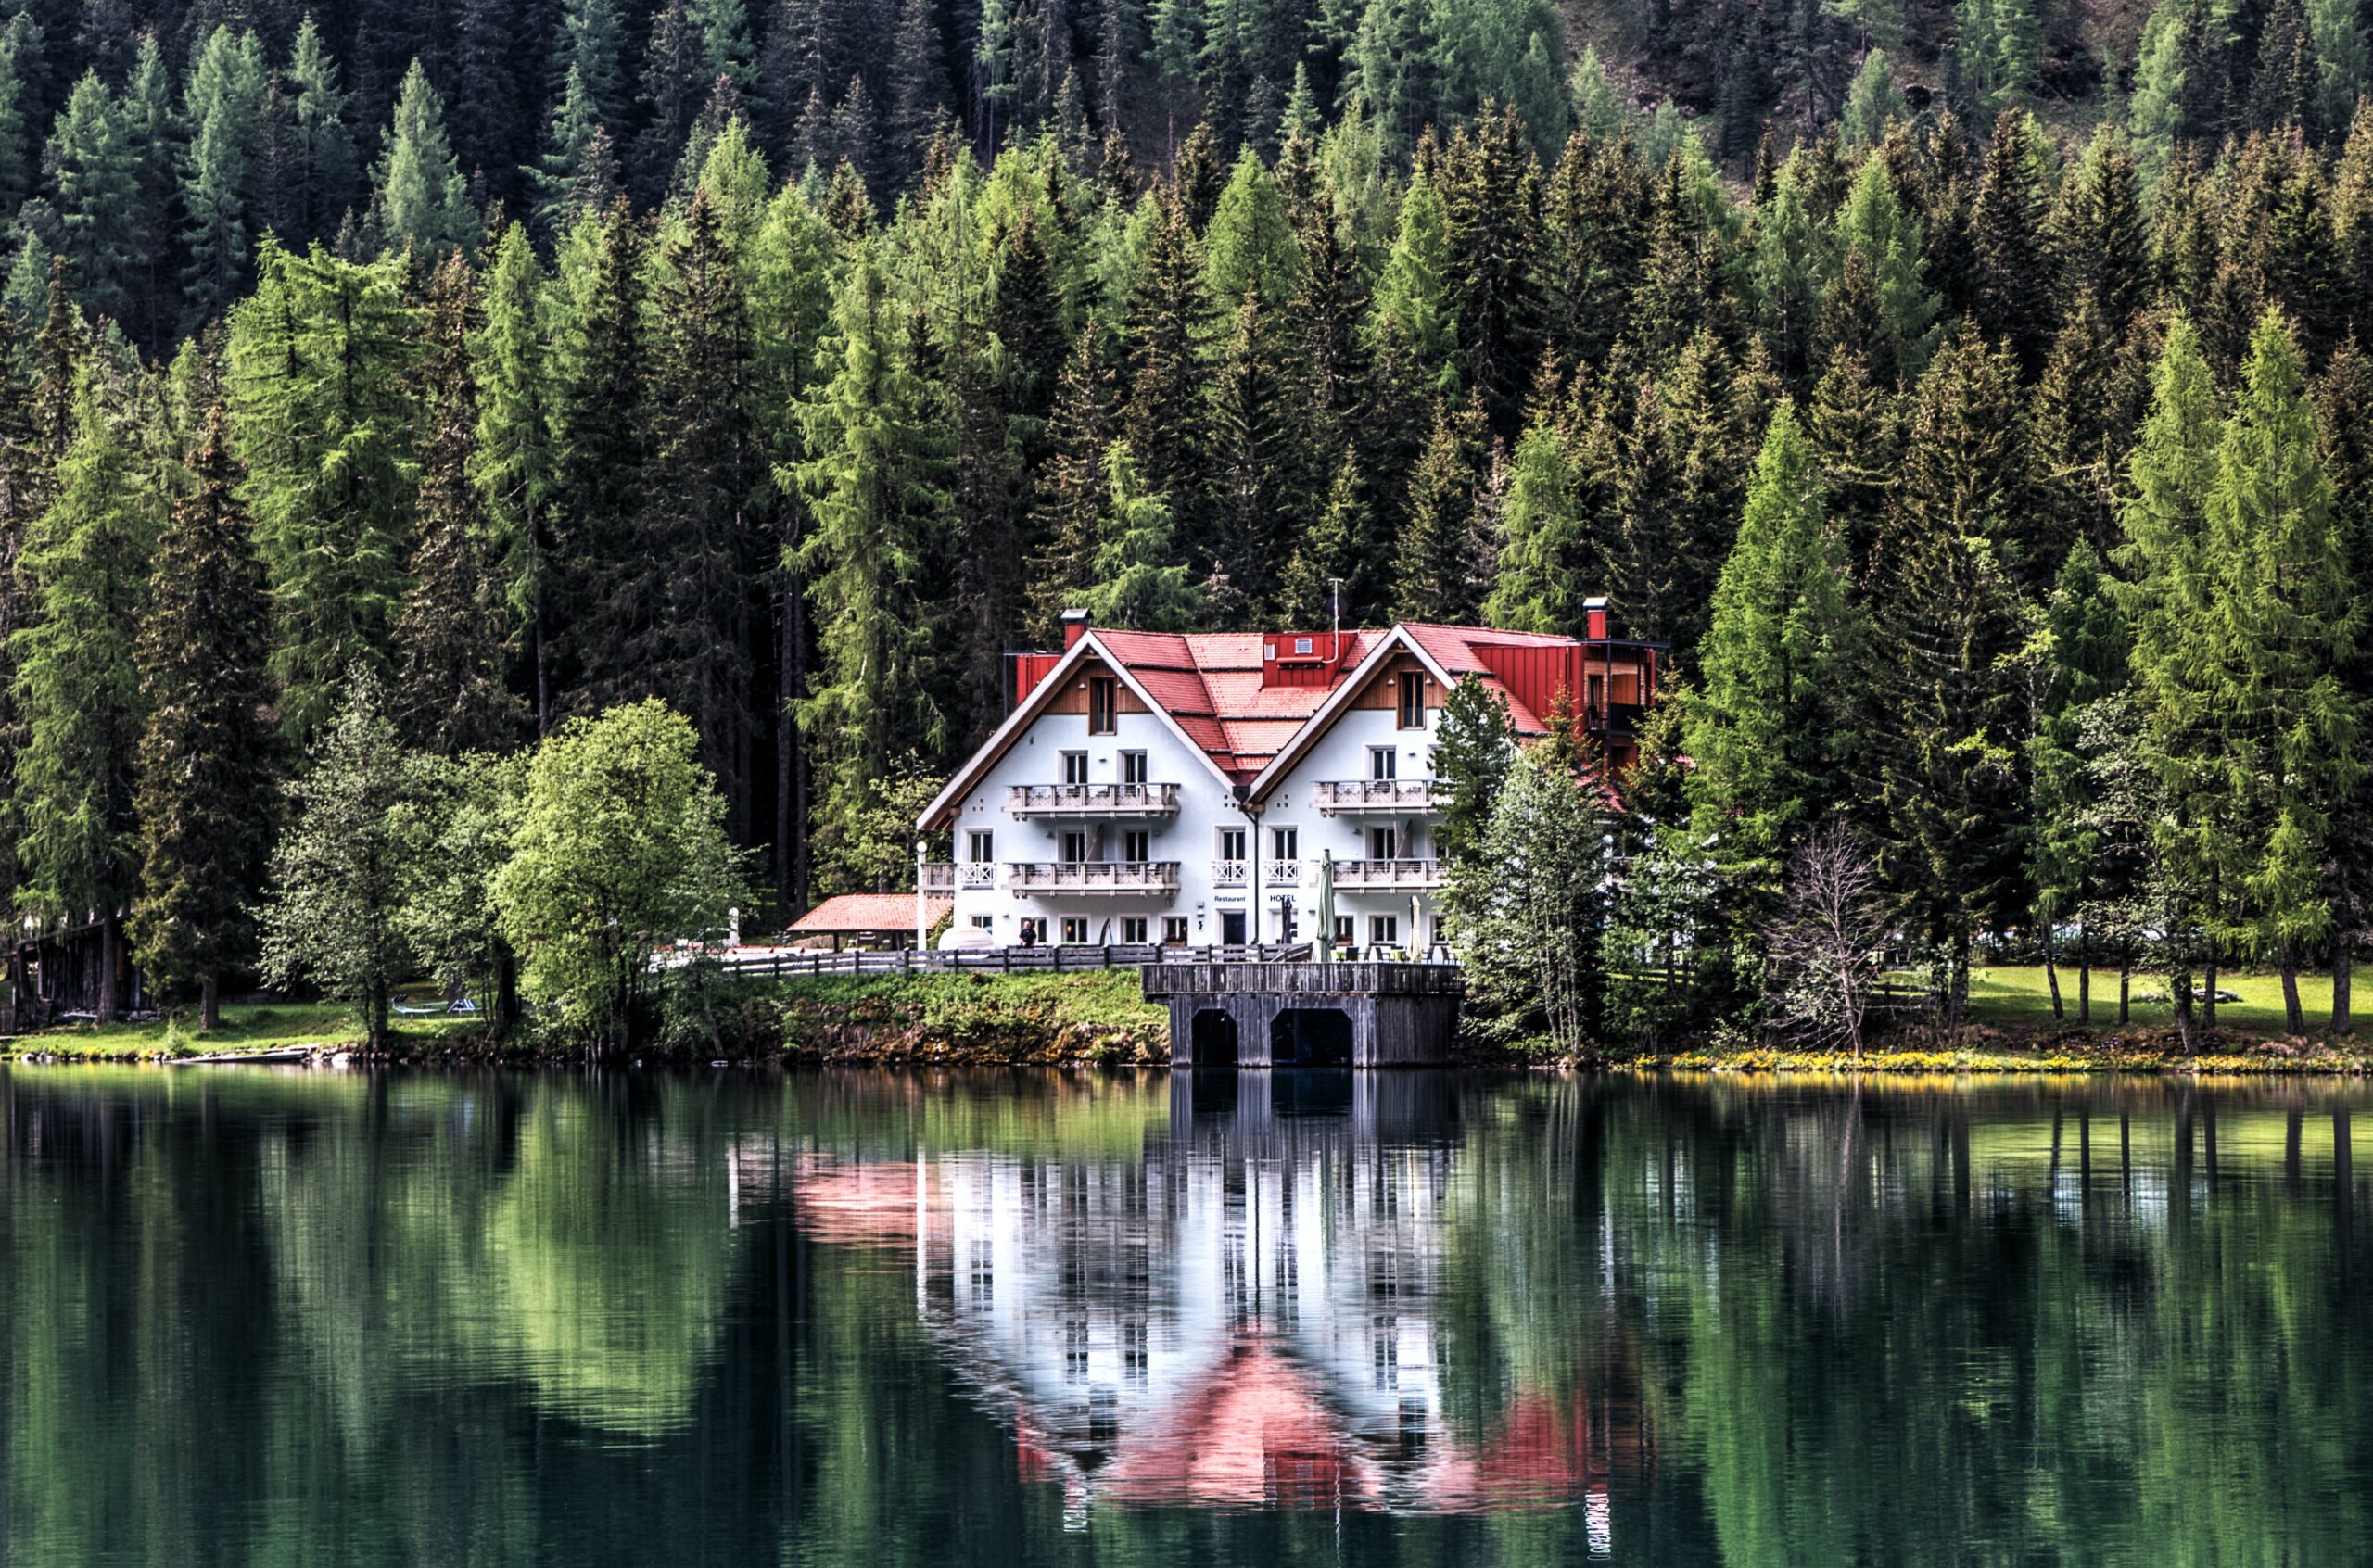 Beautiful home with a reflection in the lake.